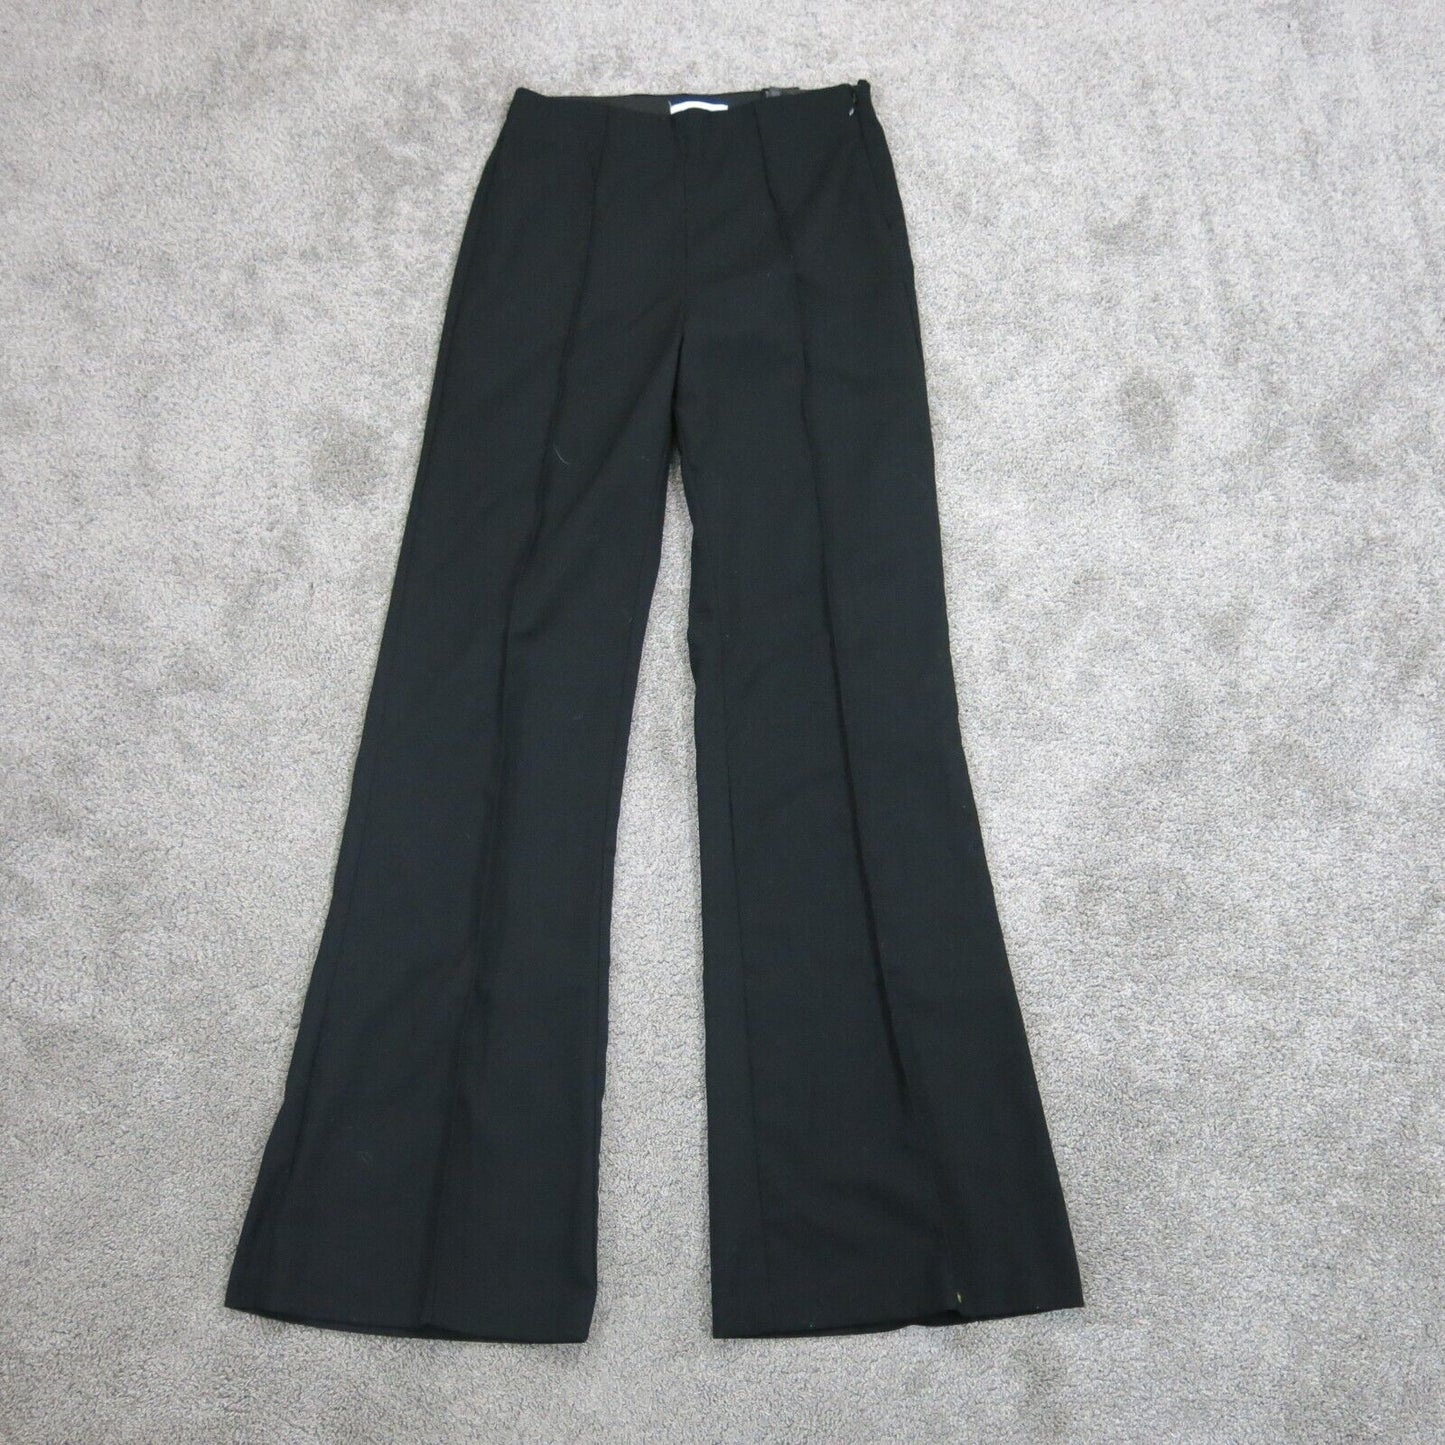 H&M Women Flared Bootcut Pant Elastic Waist Pleated Front Black Size US 4